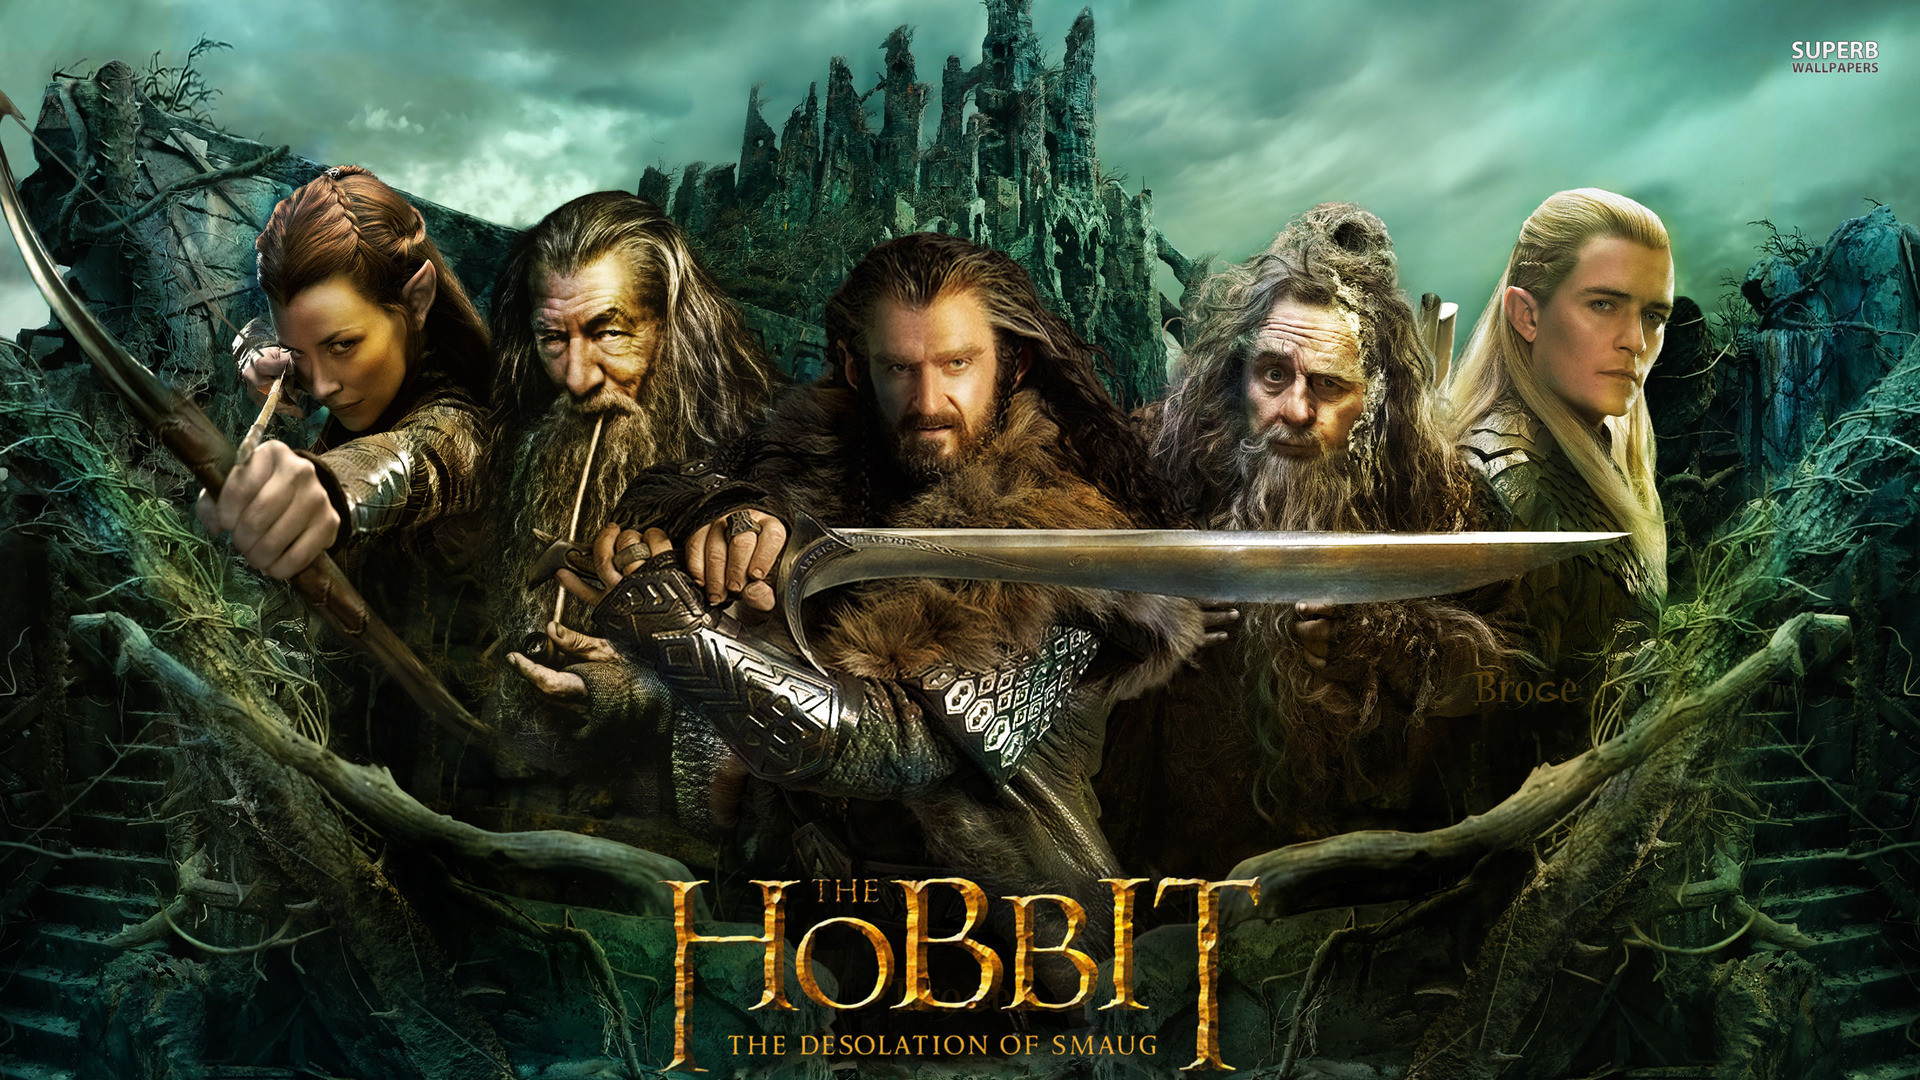 1920x1080 Attend an exclusive free sneak preview advanced screening of “The Hobbit:  The Desolation of